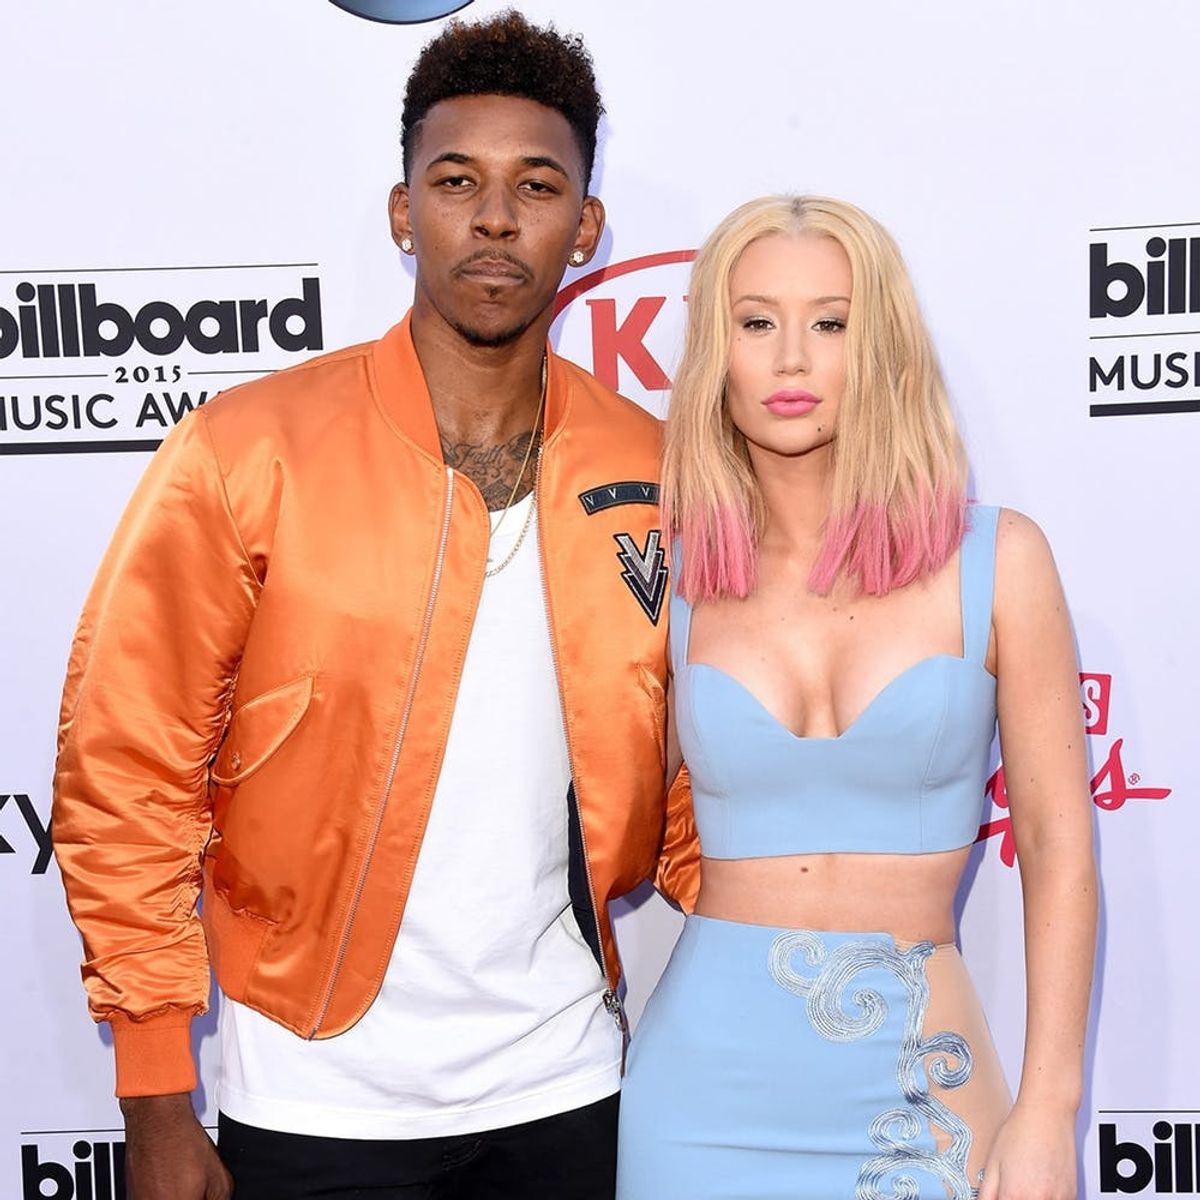 Iggy Azalea Got Engaged and Her Fiancé-Designed Ring Is Gorgeous